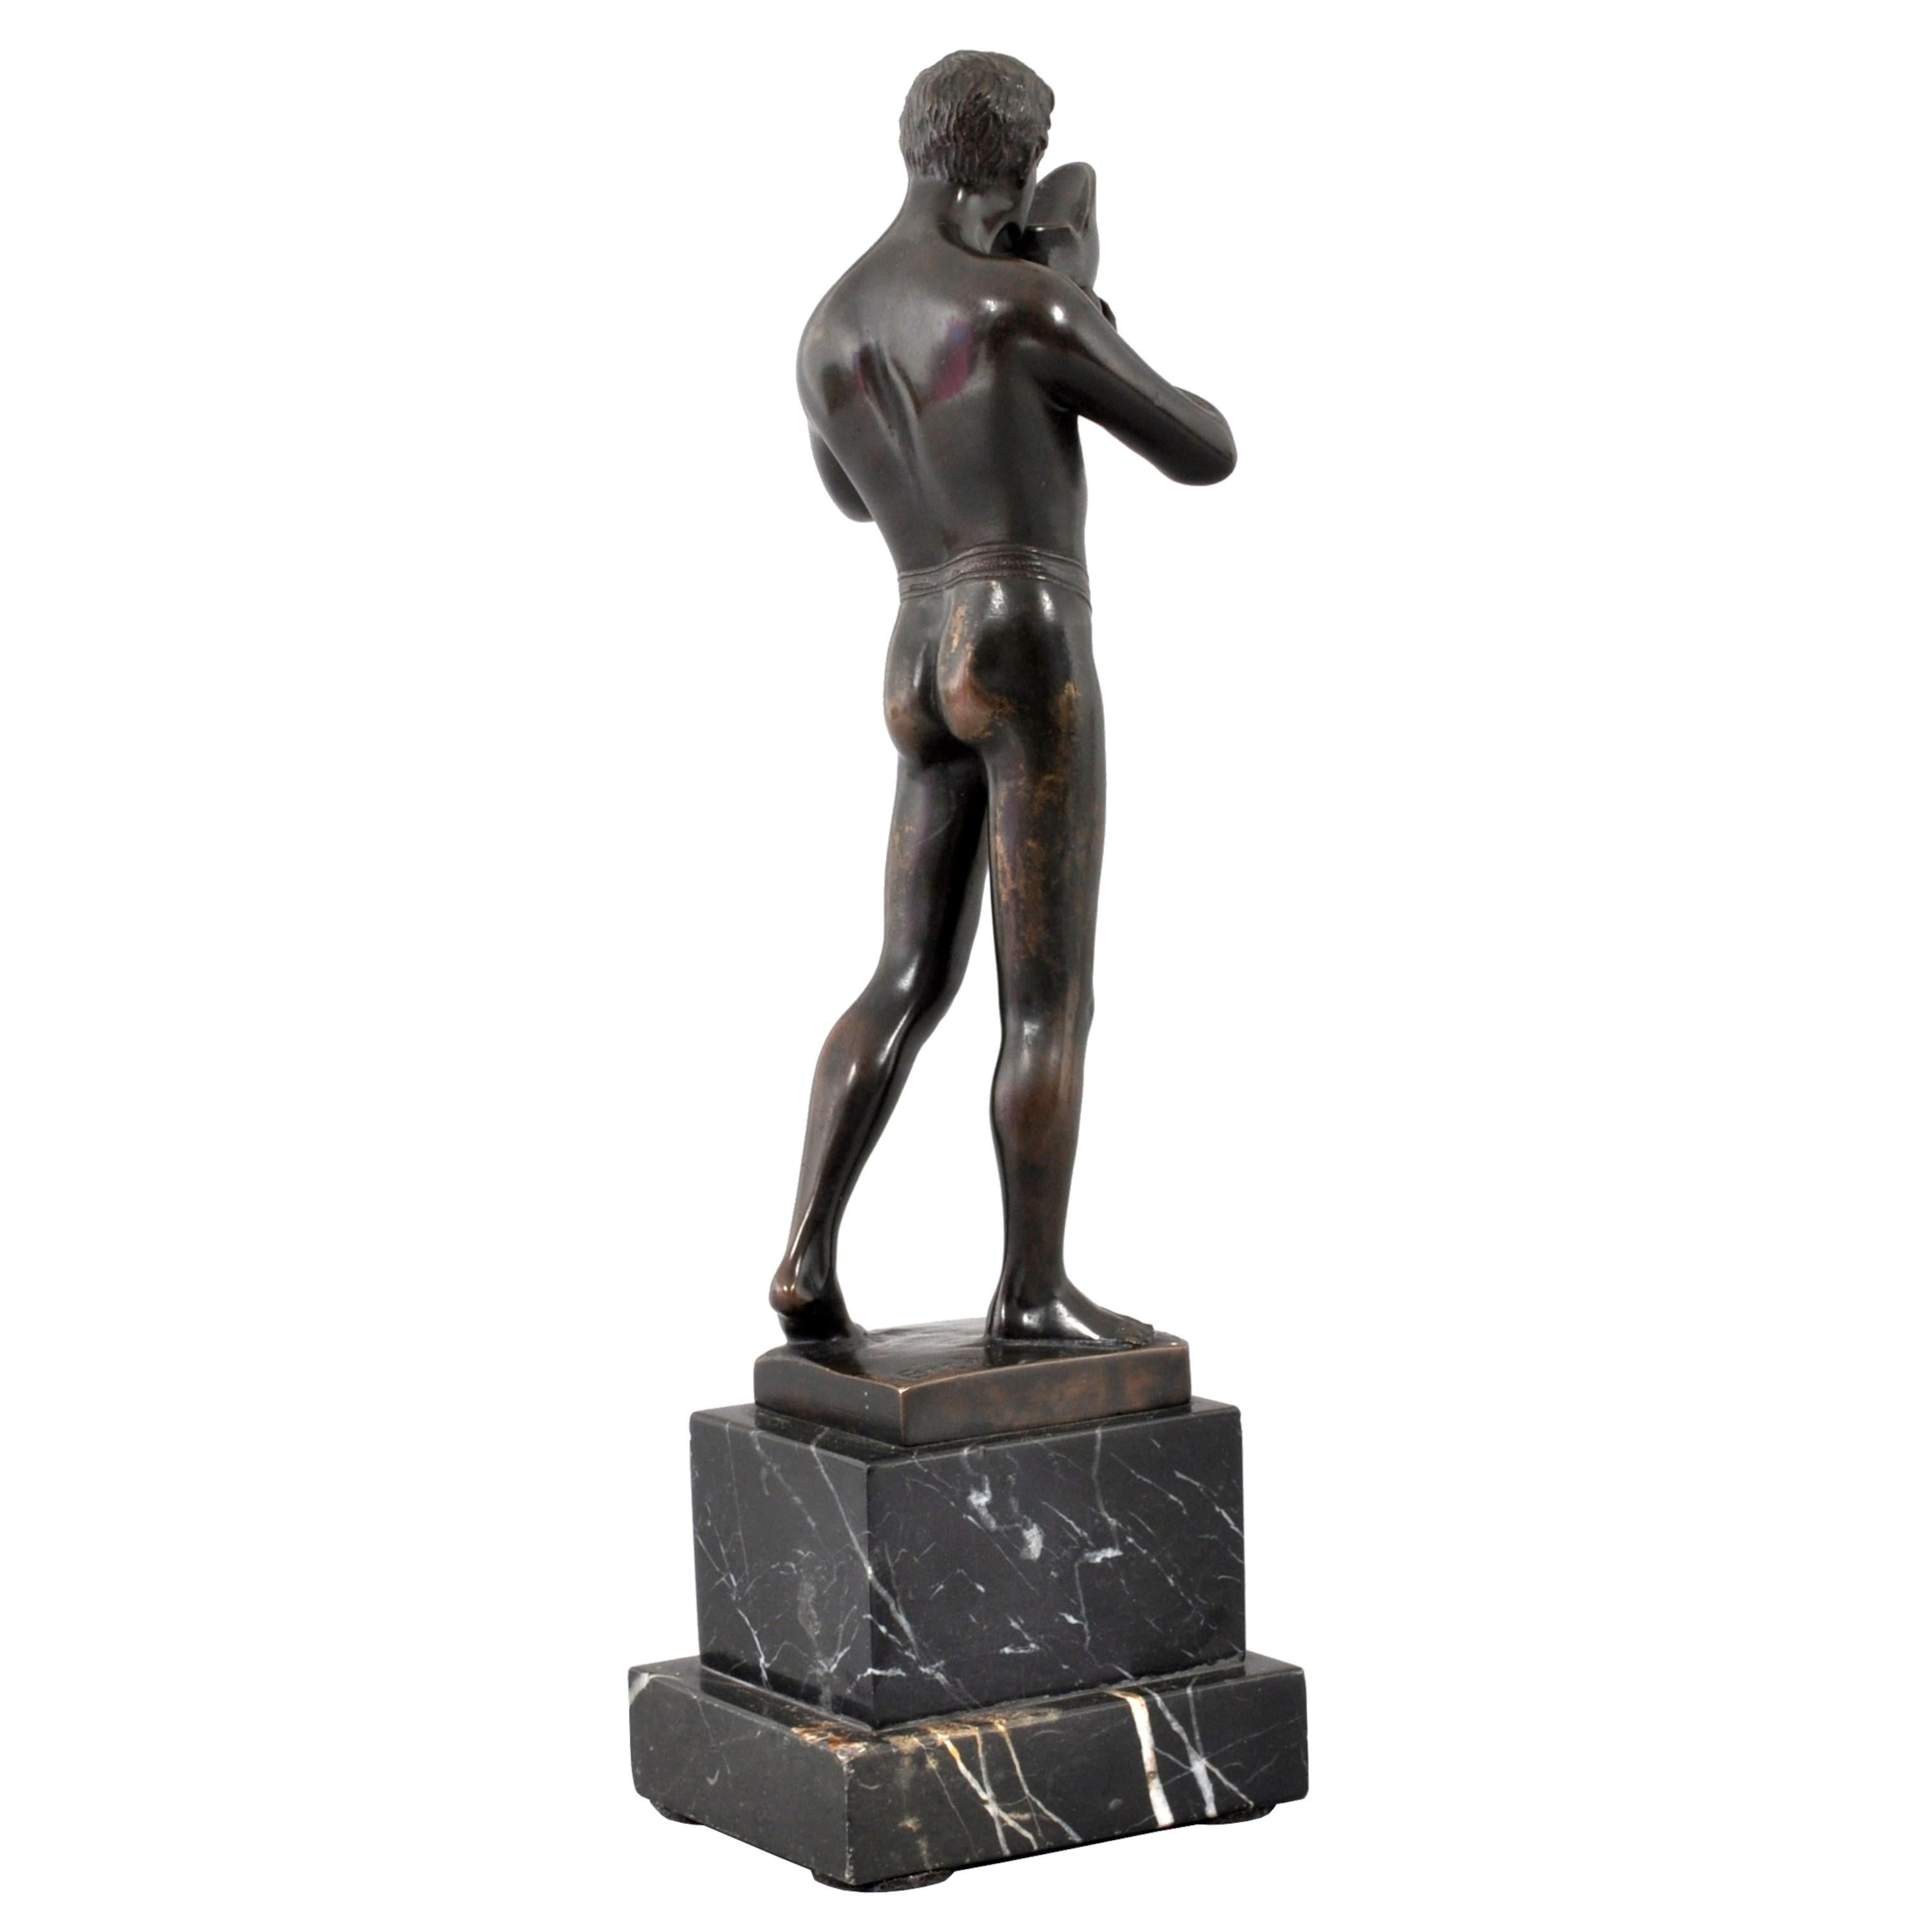 Antique Neo-classical Austrian Bronze Male Figure by Ernst Beck (1879-1941), Circa 1910. The bronze depicting a nude male figure from antiquity, wearing a loin cloth and drinking from a Grecian helmet. The bronze signed 